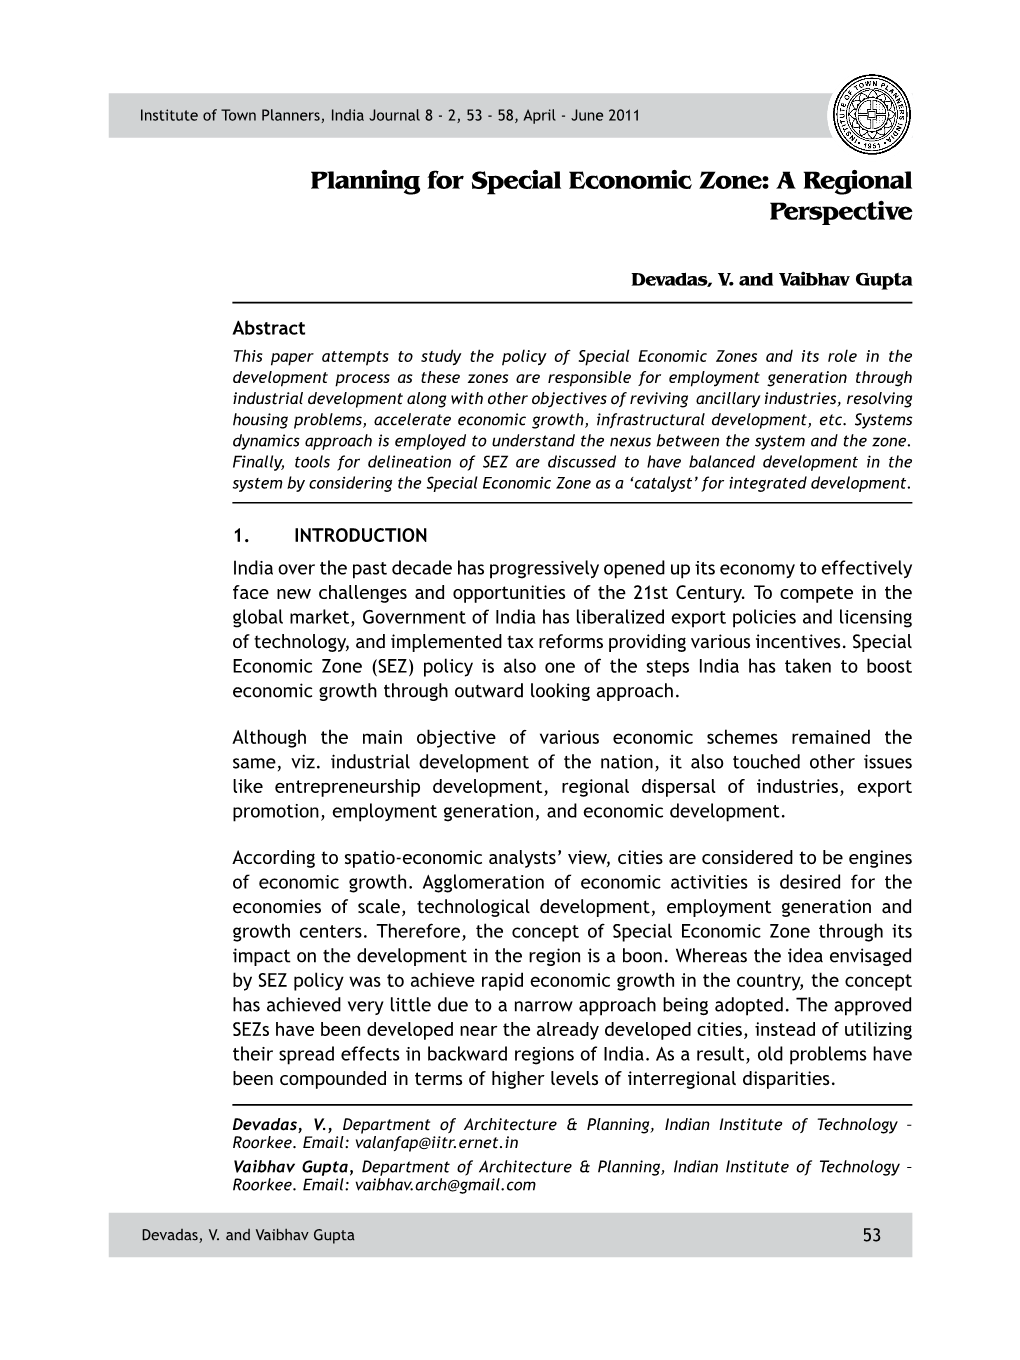 Planning for Special Economic Zone: a Regional Perspective